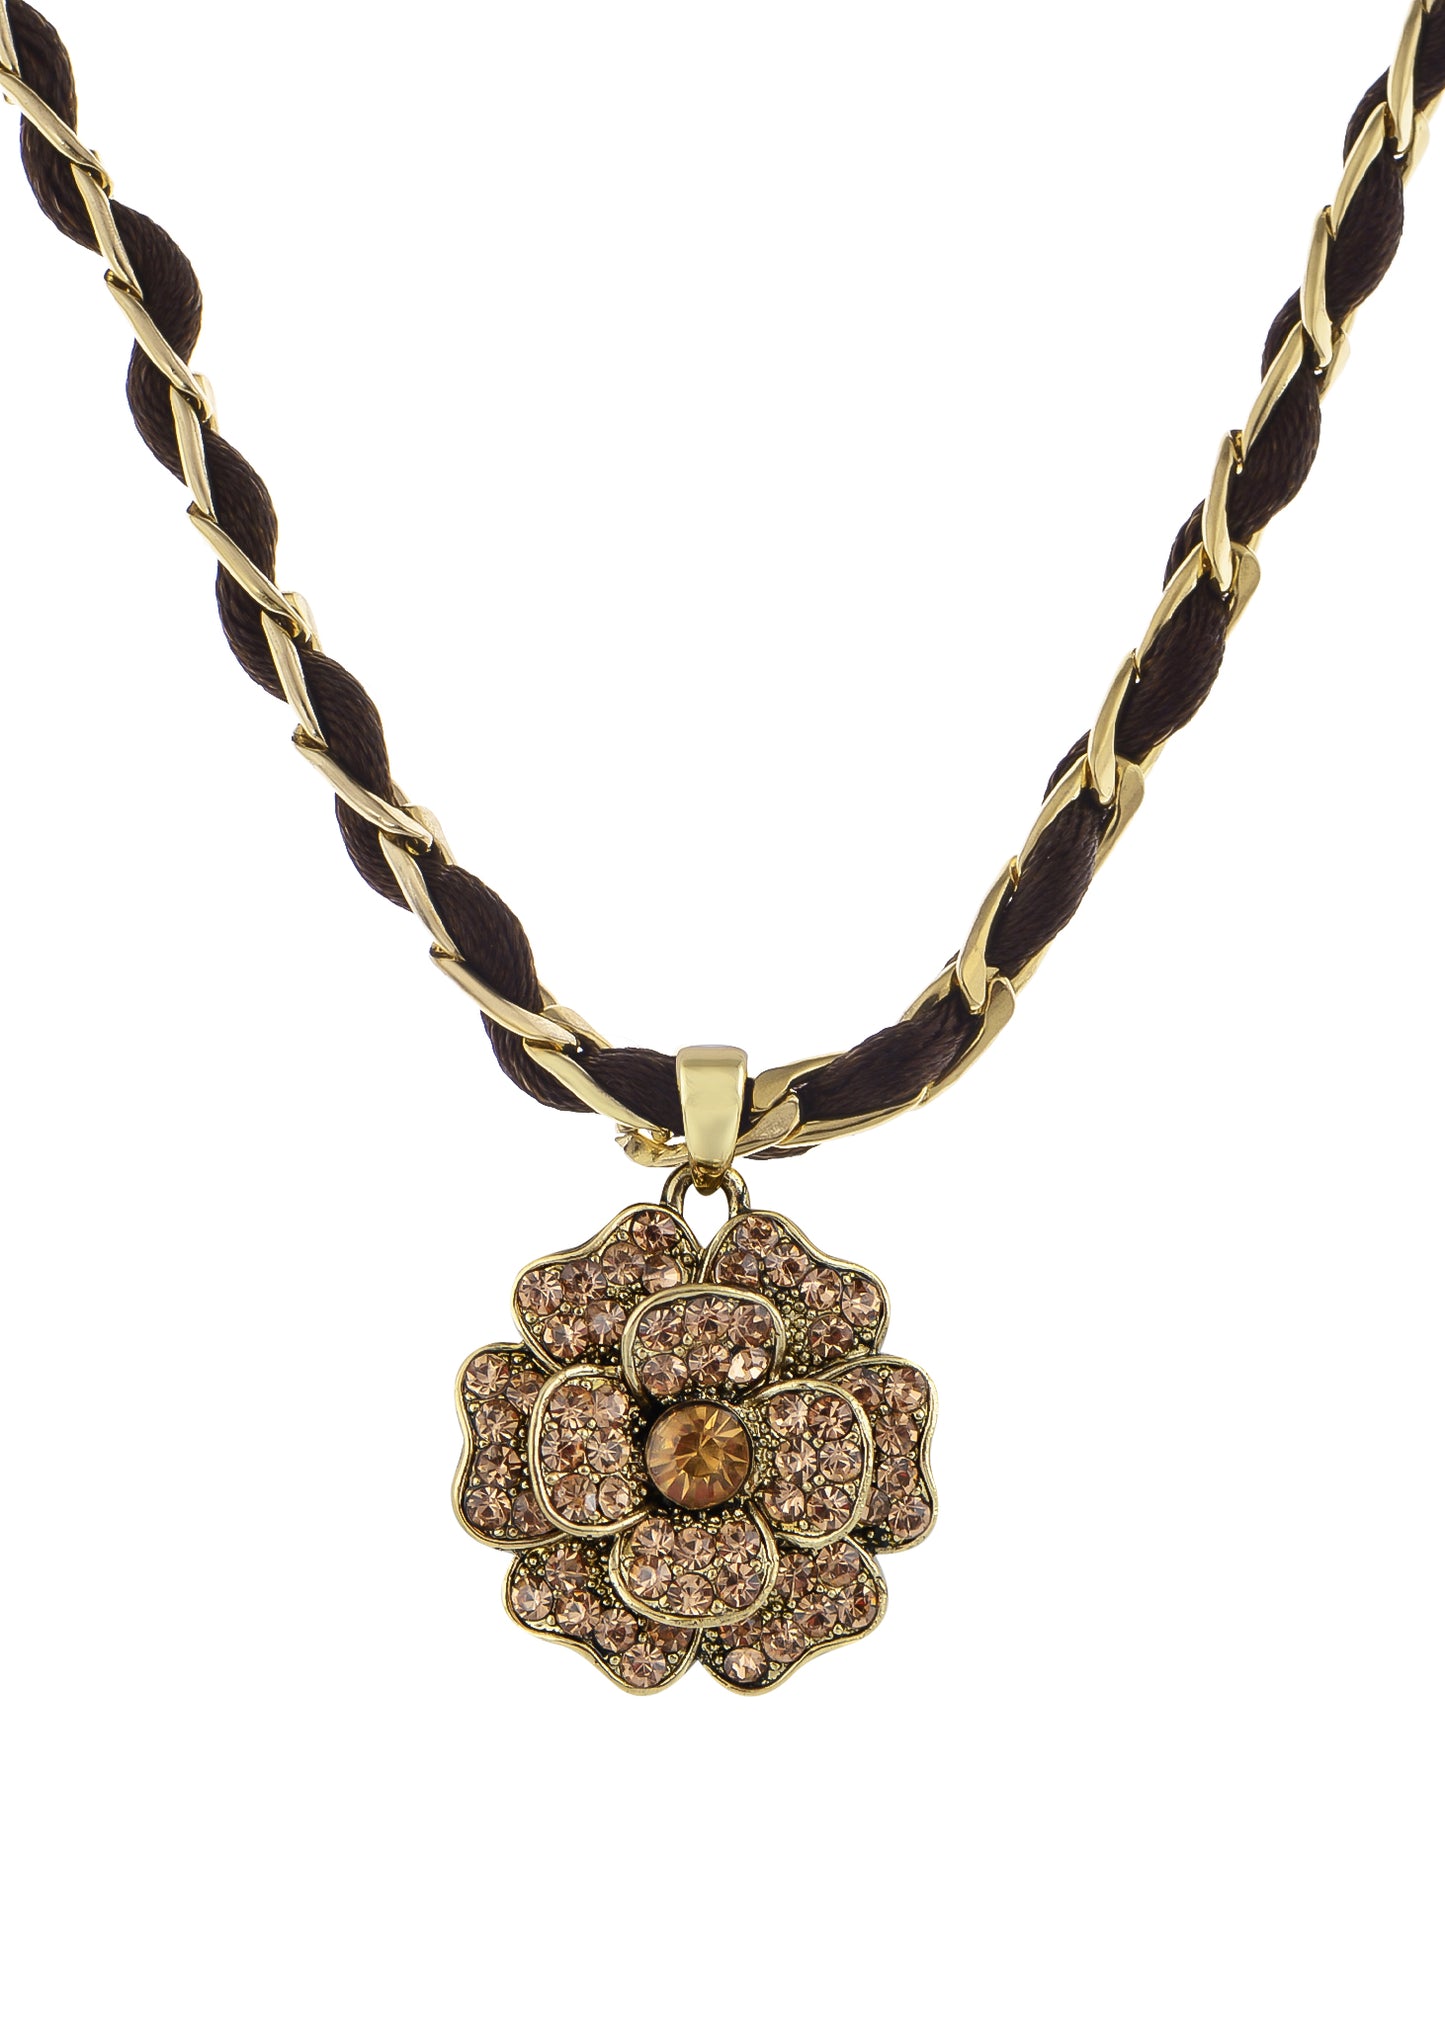 Light Smoked Topaz Colored Single Flower Element Necklace